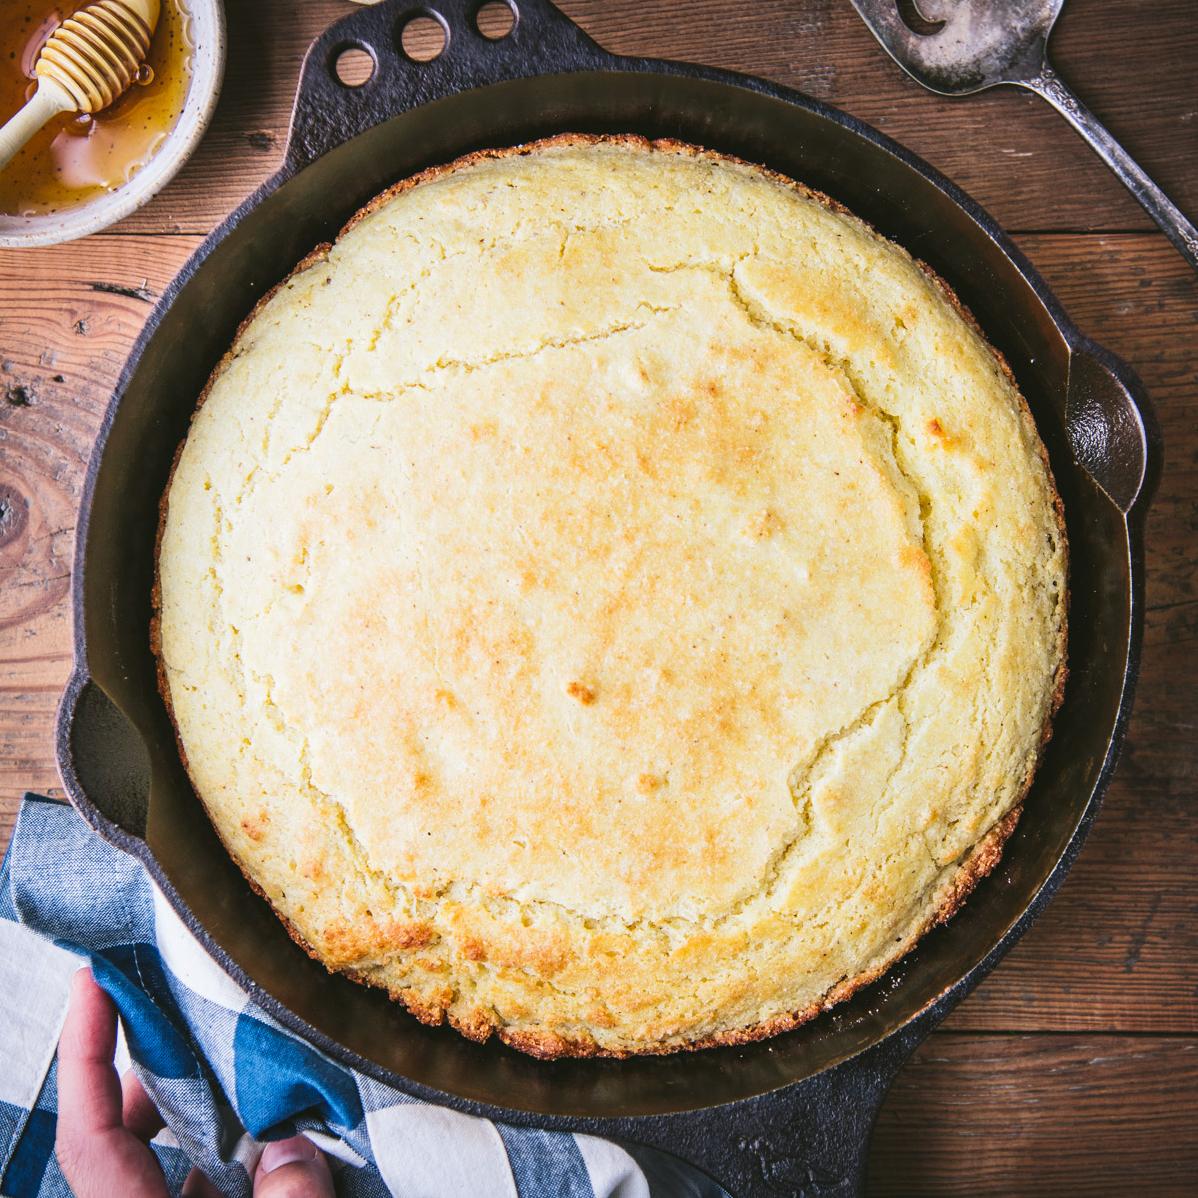  Even if you're not from the South, you'll feel like a true Southerner after tasting this cornbread.